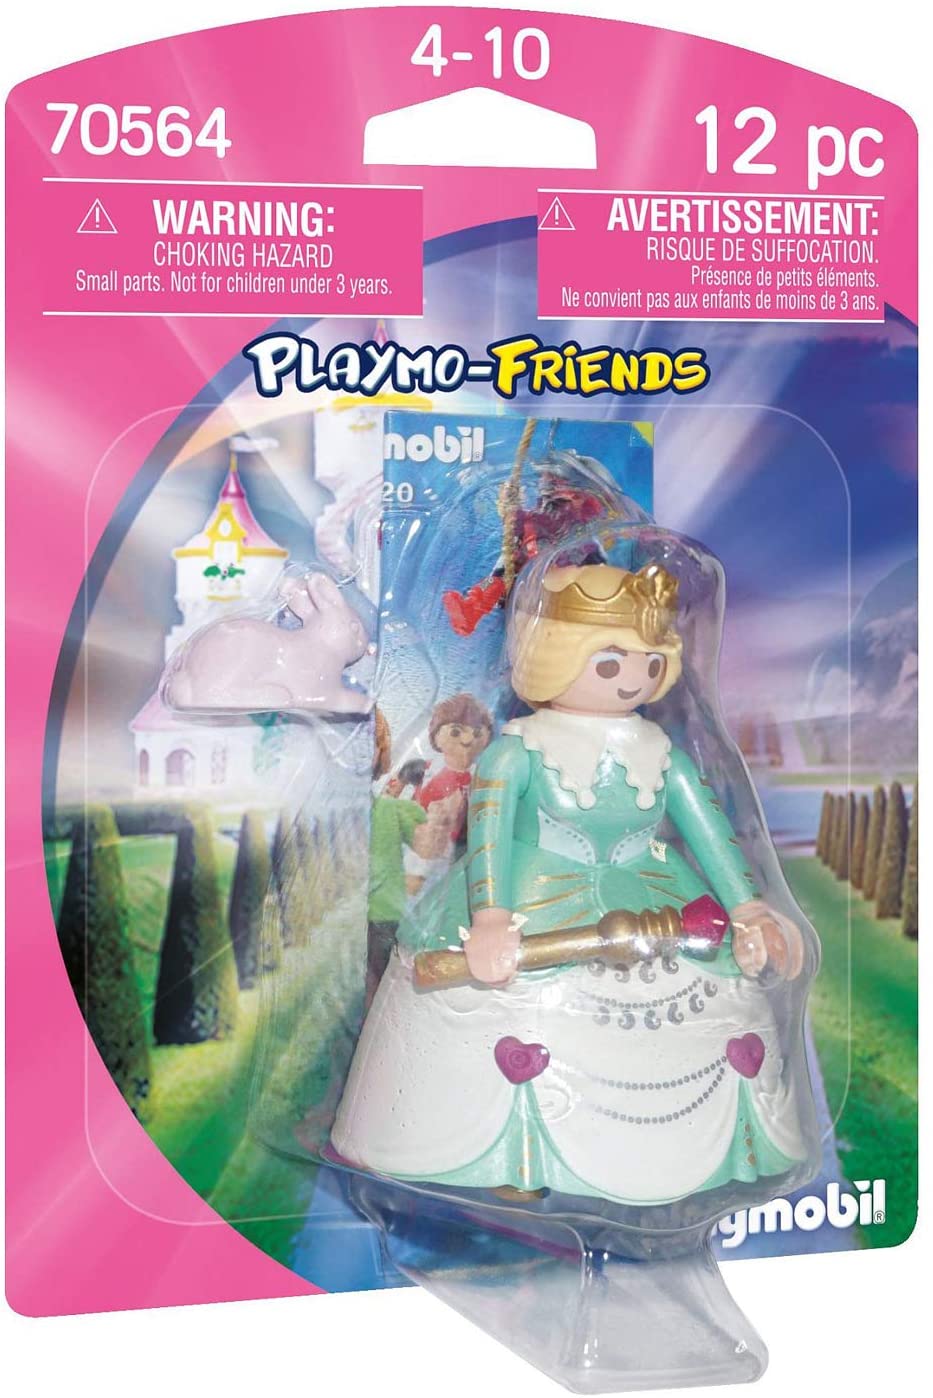 Playmobil 70564 Playmo-Friends Magical Princess, for Children Ages 4+